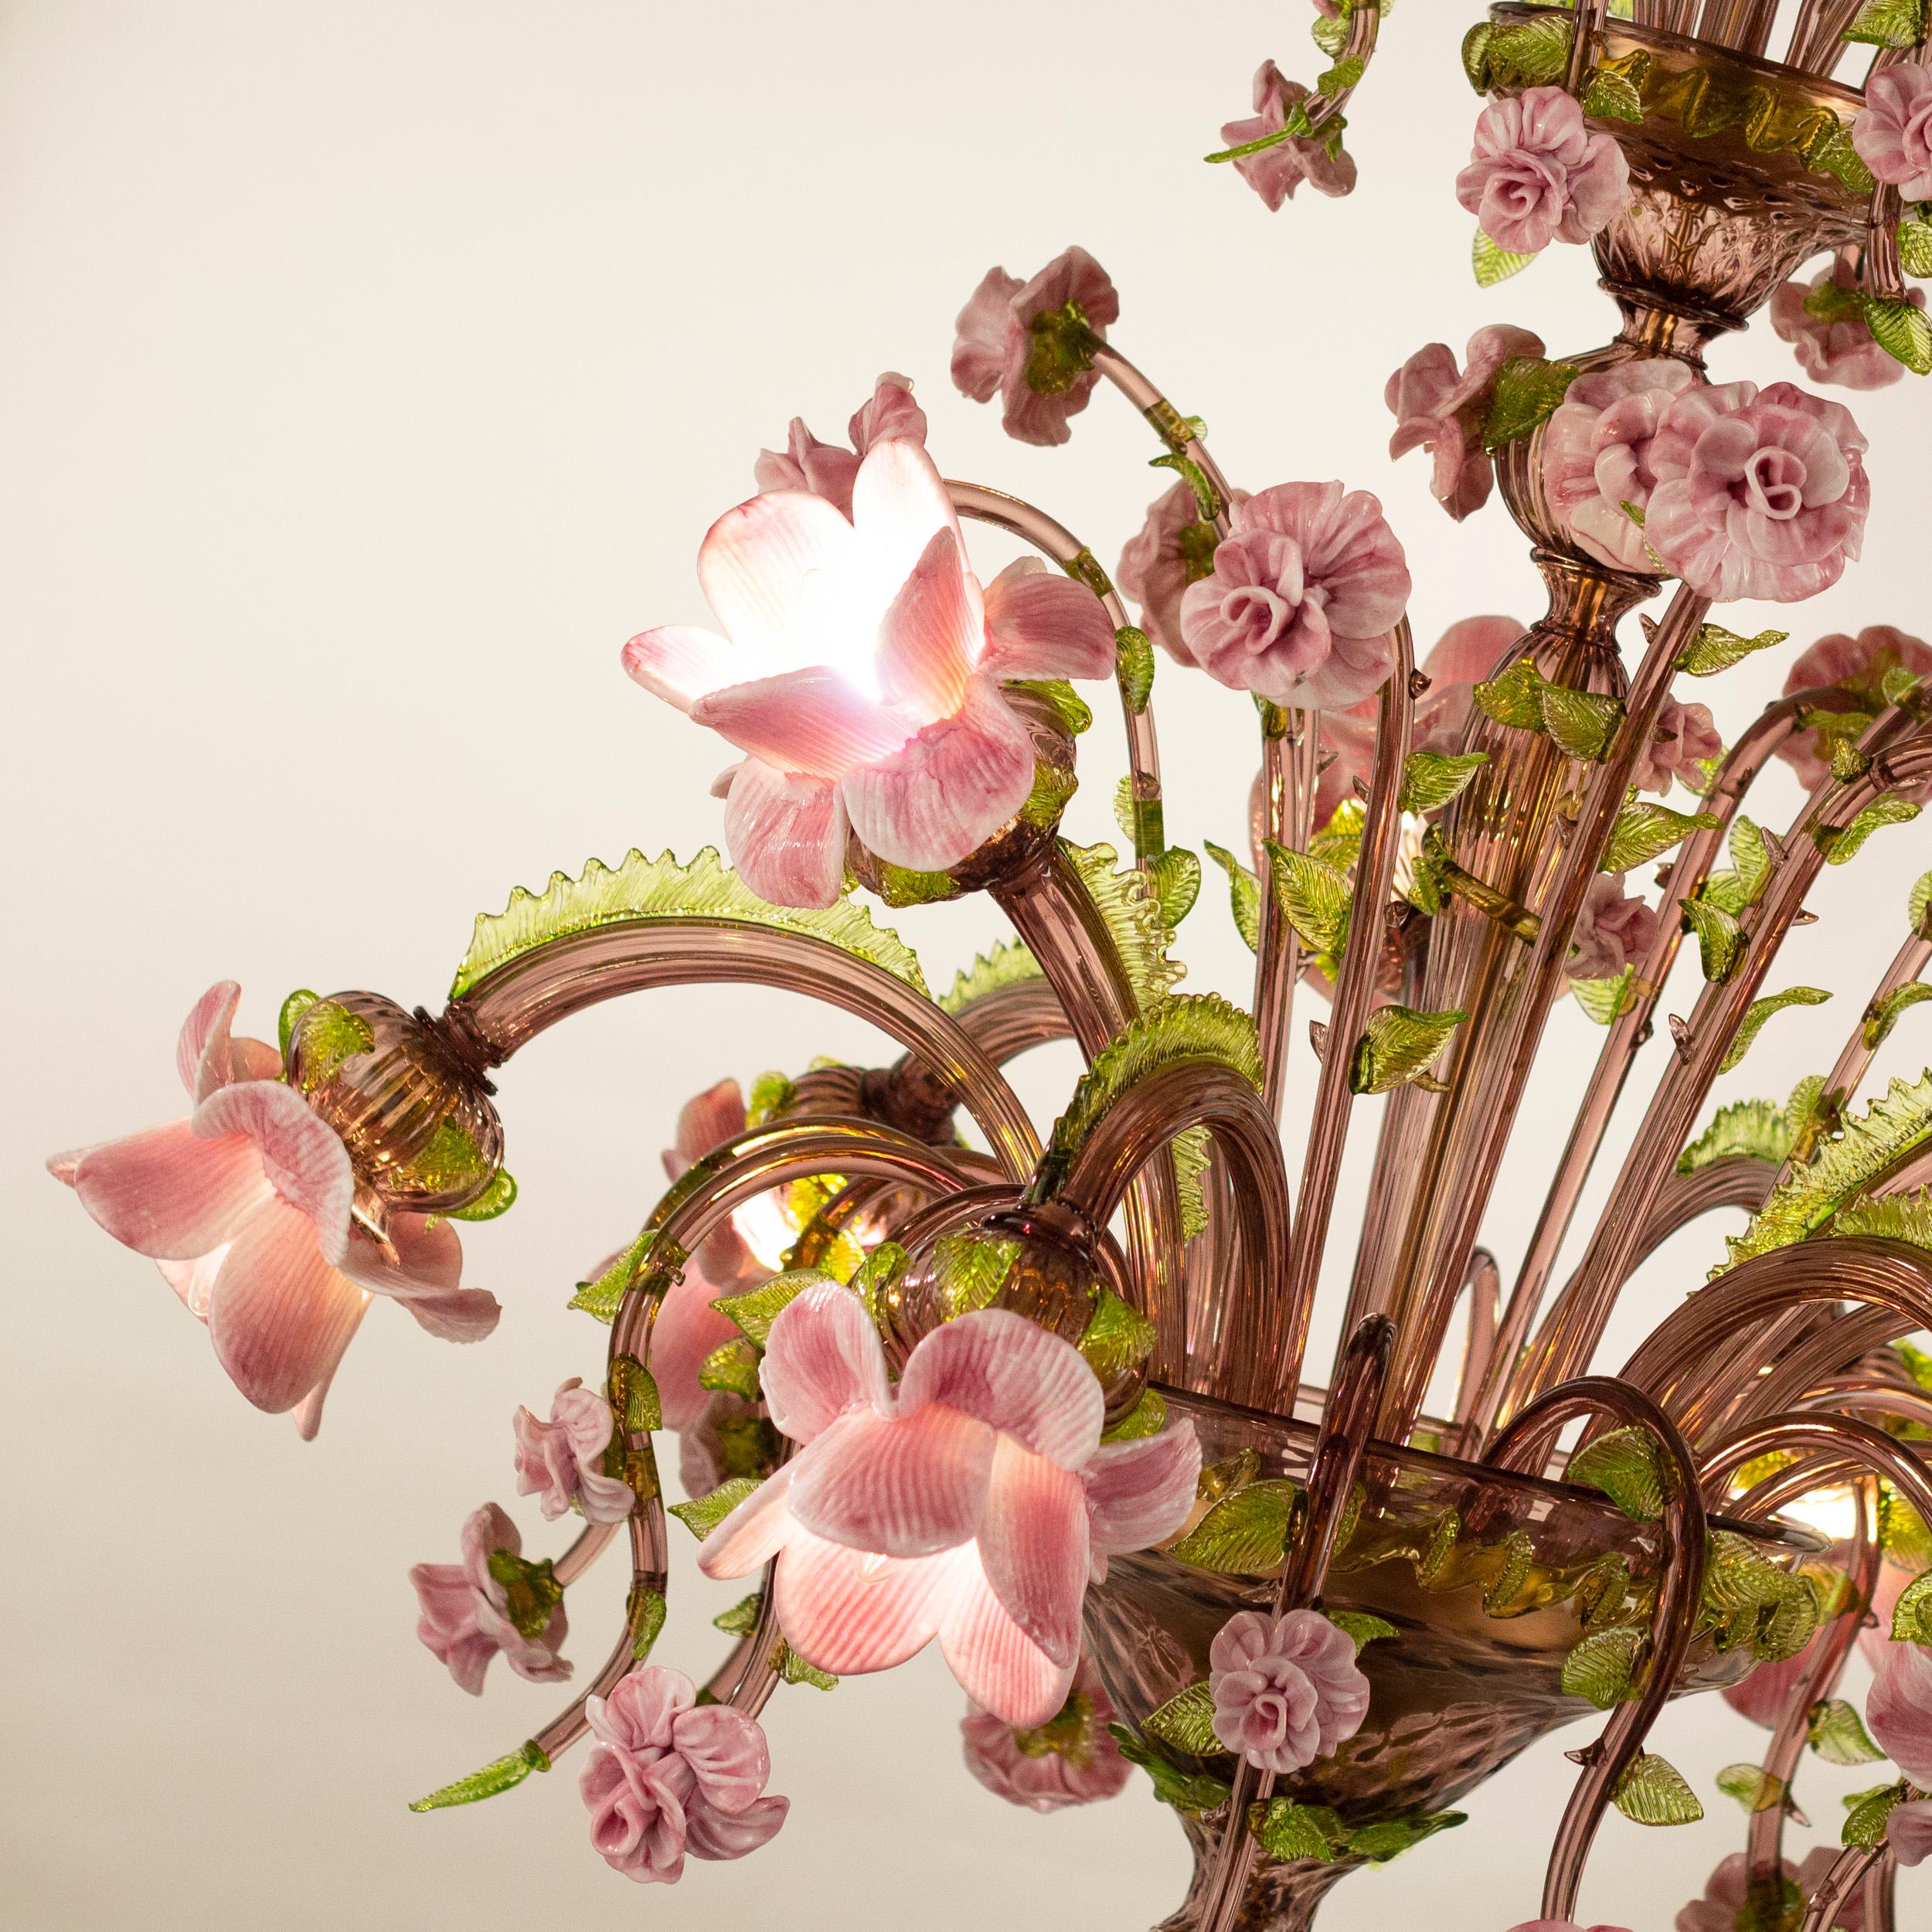 Artistic chandelier 9 arms in amethyst and green Murano glass, flowers in pink vitreous paste Rosae Rosarum by Multiforme.
Three of our Timeless collections have taken inspiration from flowers: Rosae Rosarum, Girasole and Iris; this is the